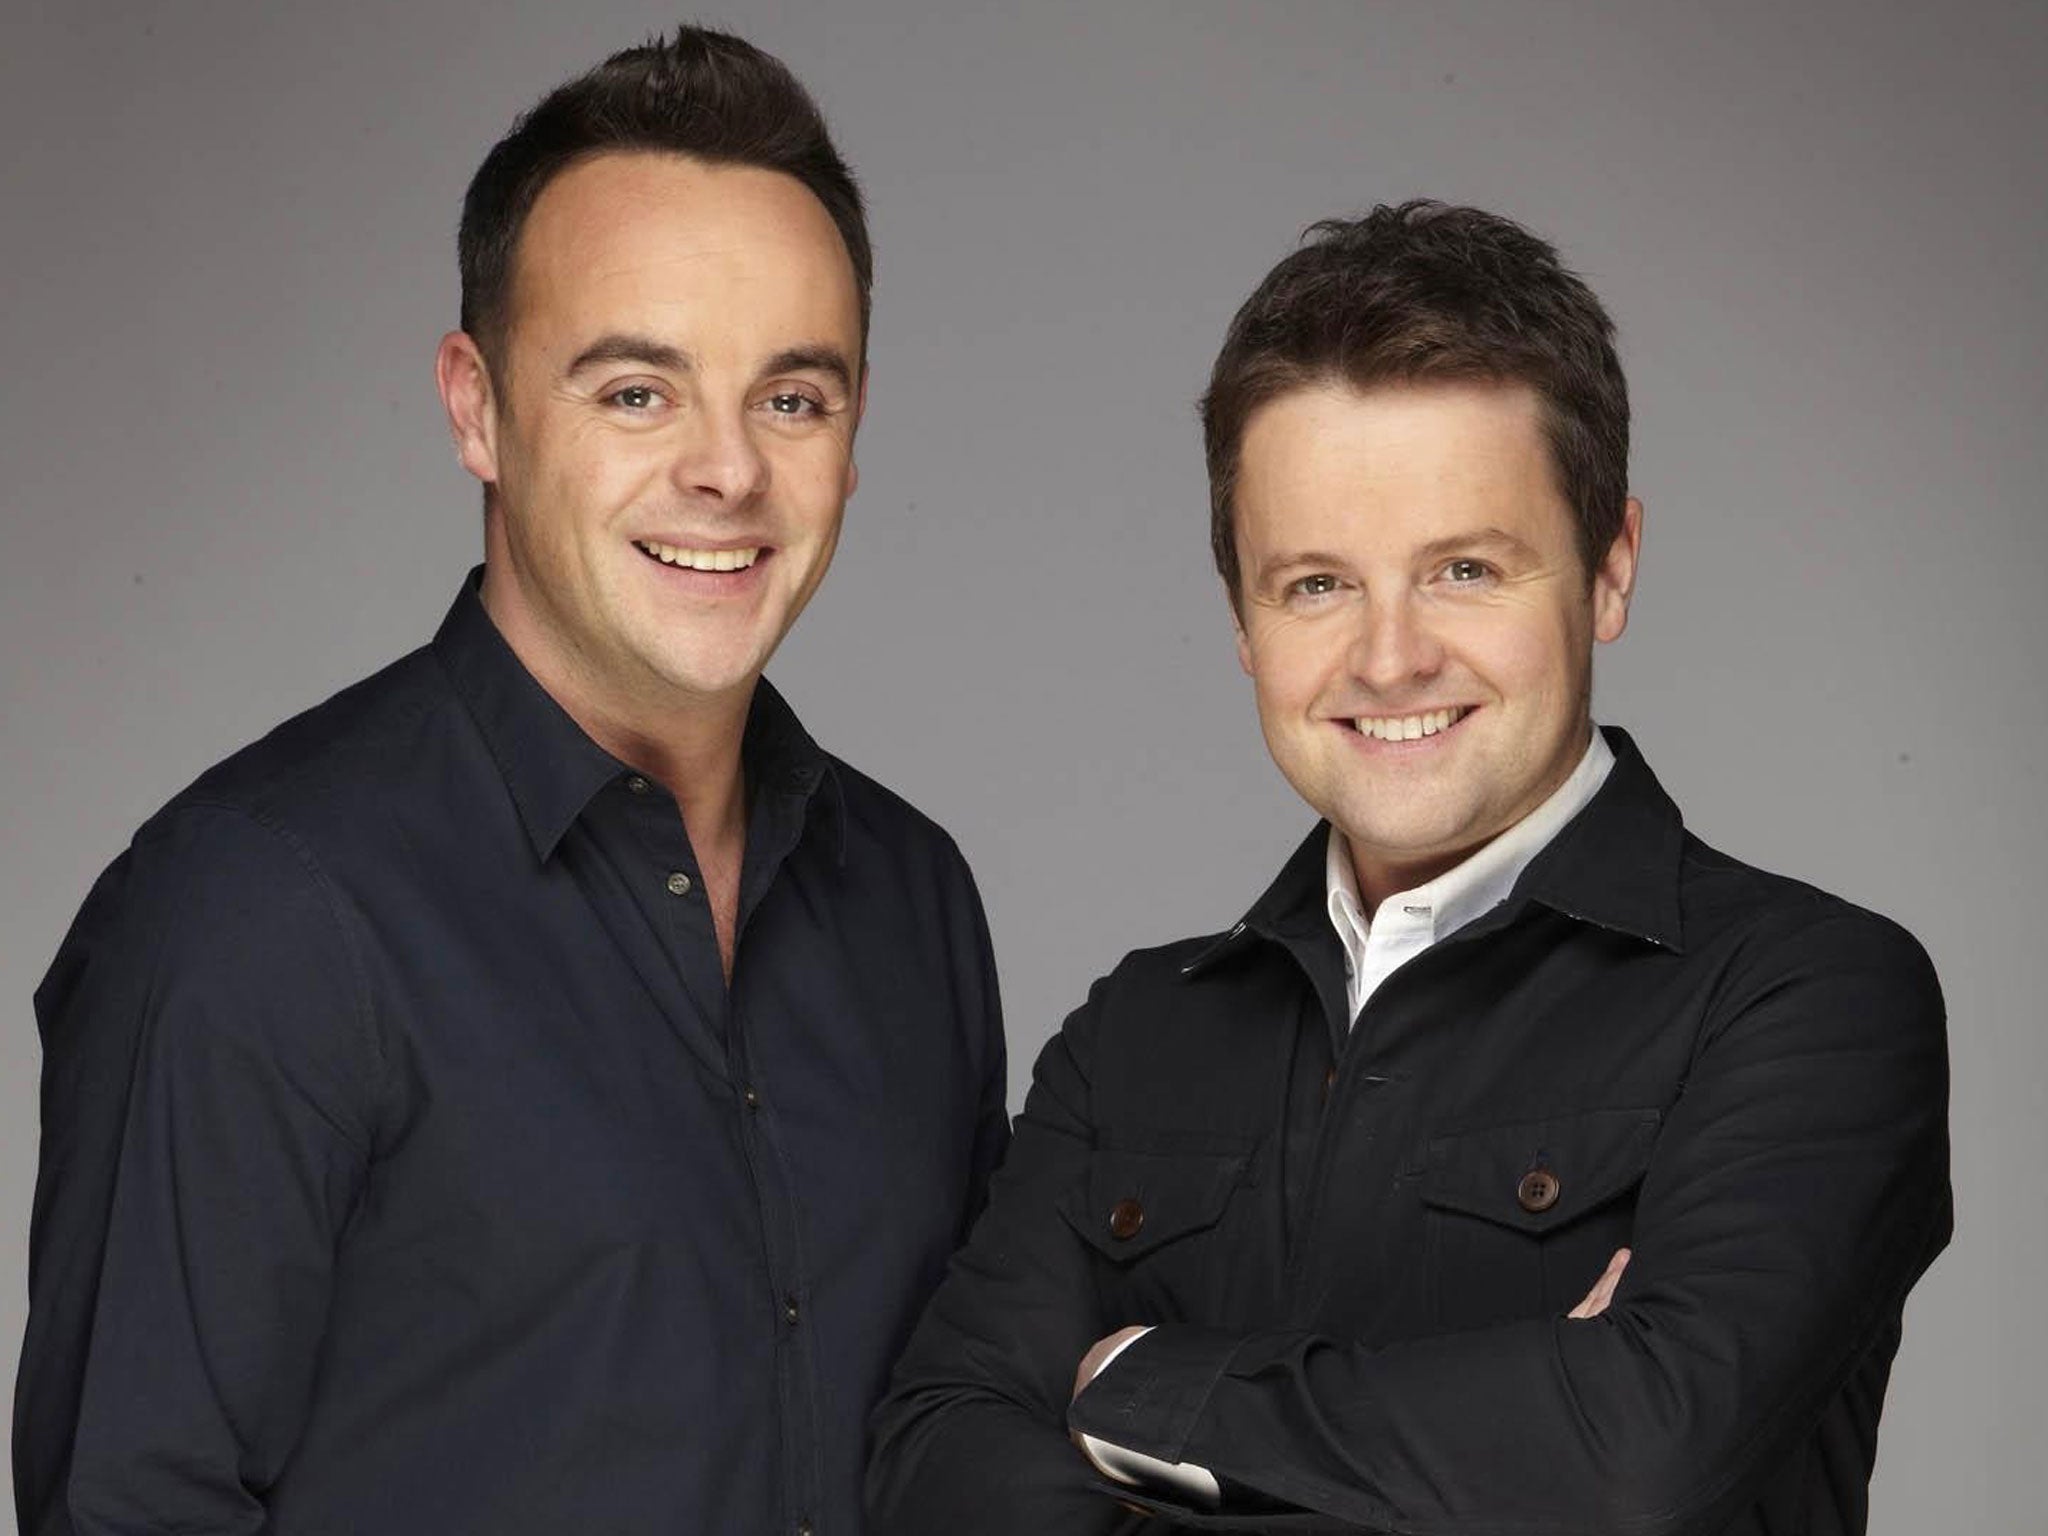 Women would rather sleep with Dec than Ant. (Dec’s the one on the right)